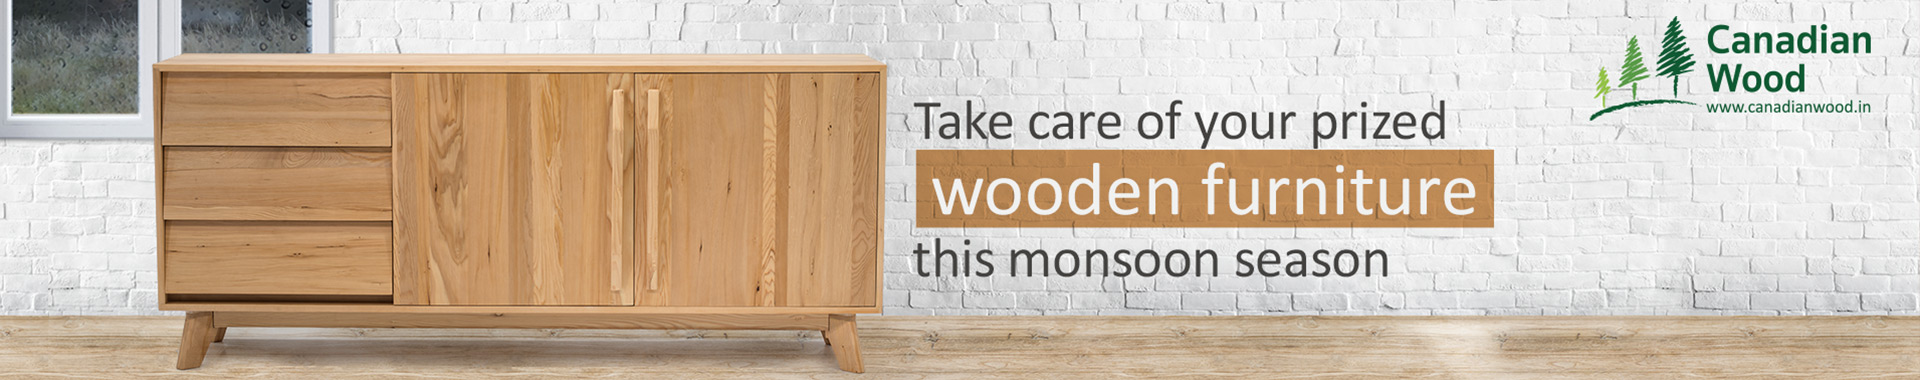 Take Care Of Your Prized Wooden Furniture This Monsoon Season - Canadian Wood